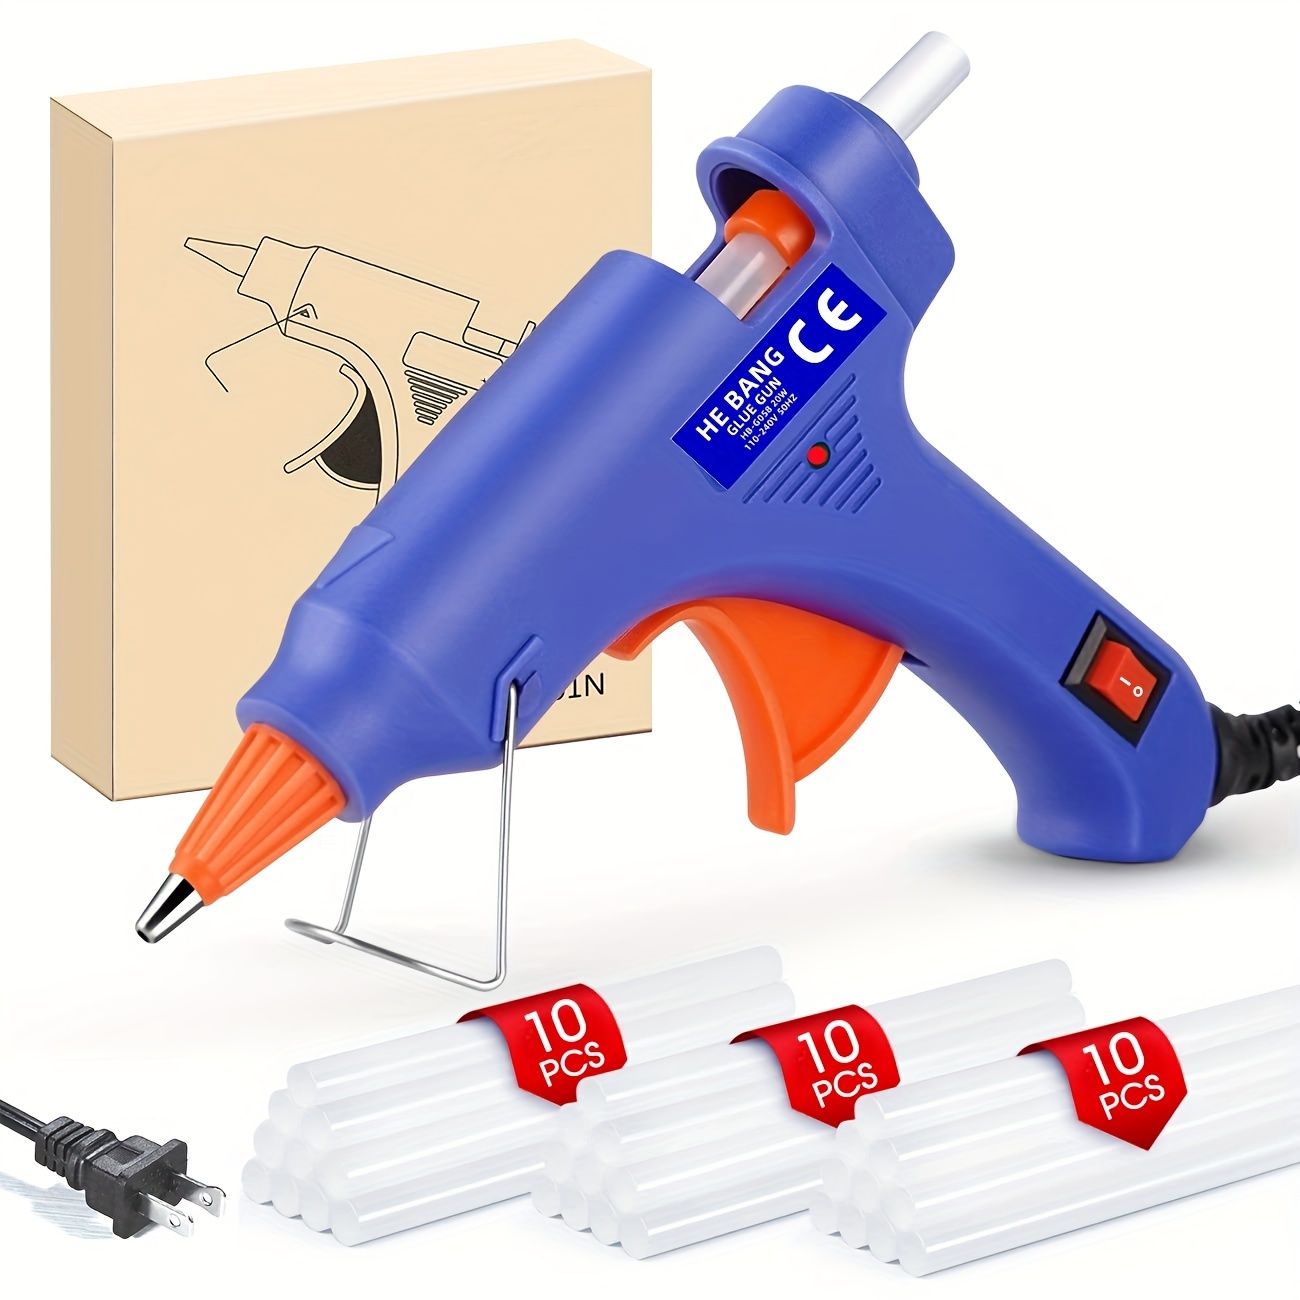 USB Rechargeable Hot Melt Cordless Glue Gun (70515) Comes with